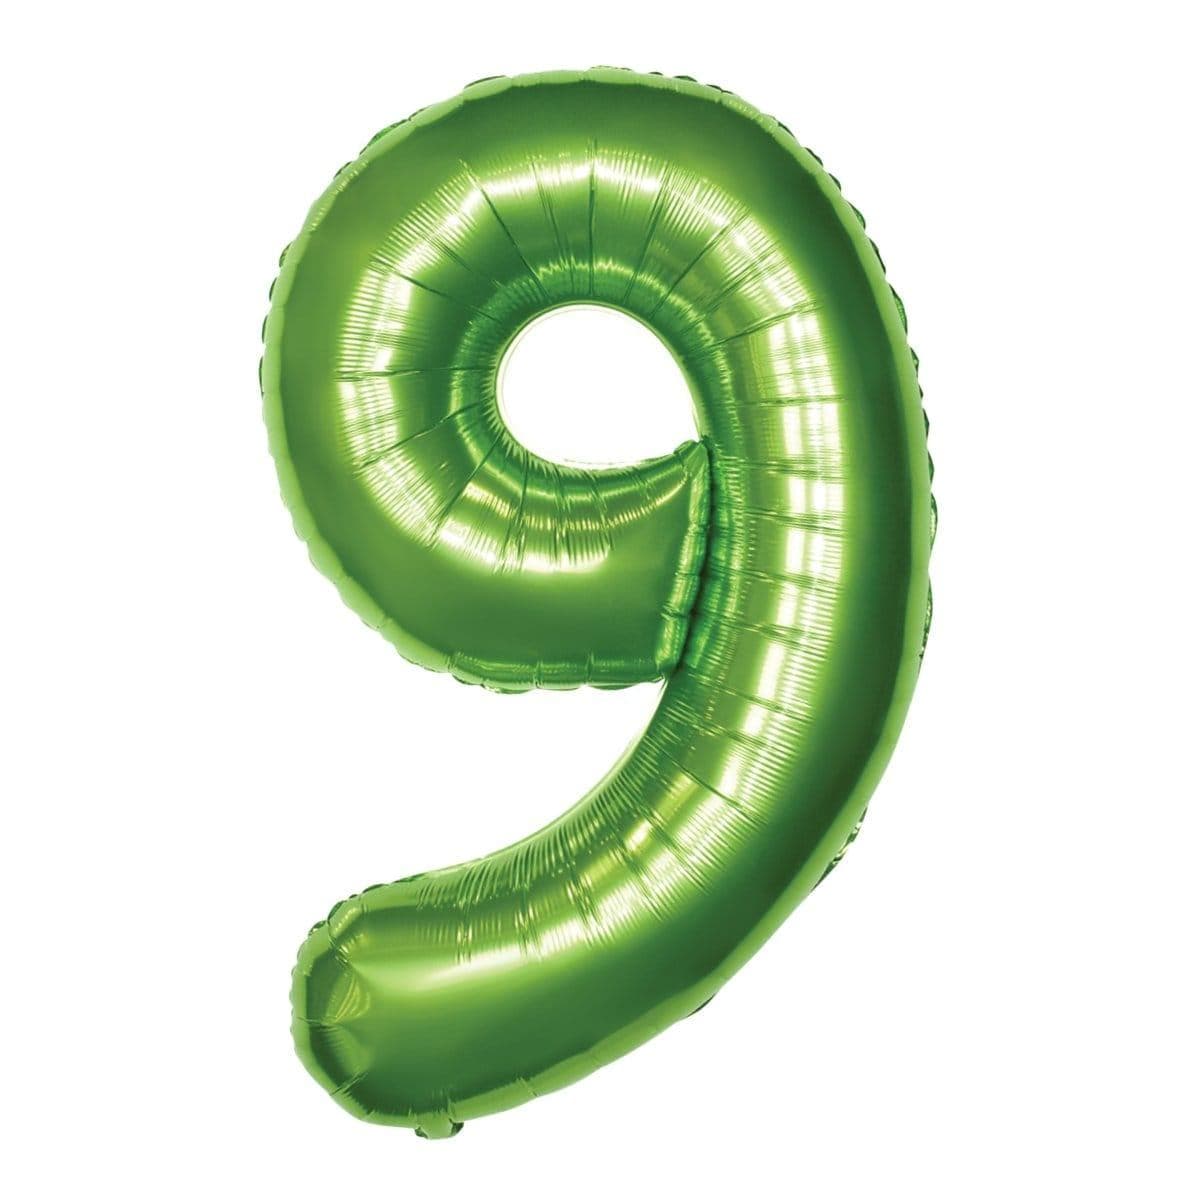 Buy Balloons Lime Green Number 9 Foil Balloon, 34 Inches sold at Party Expert